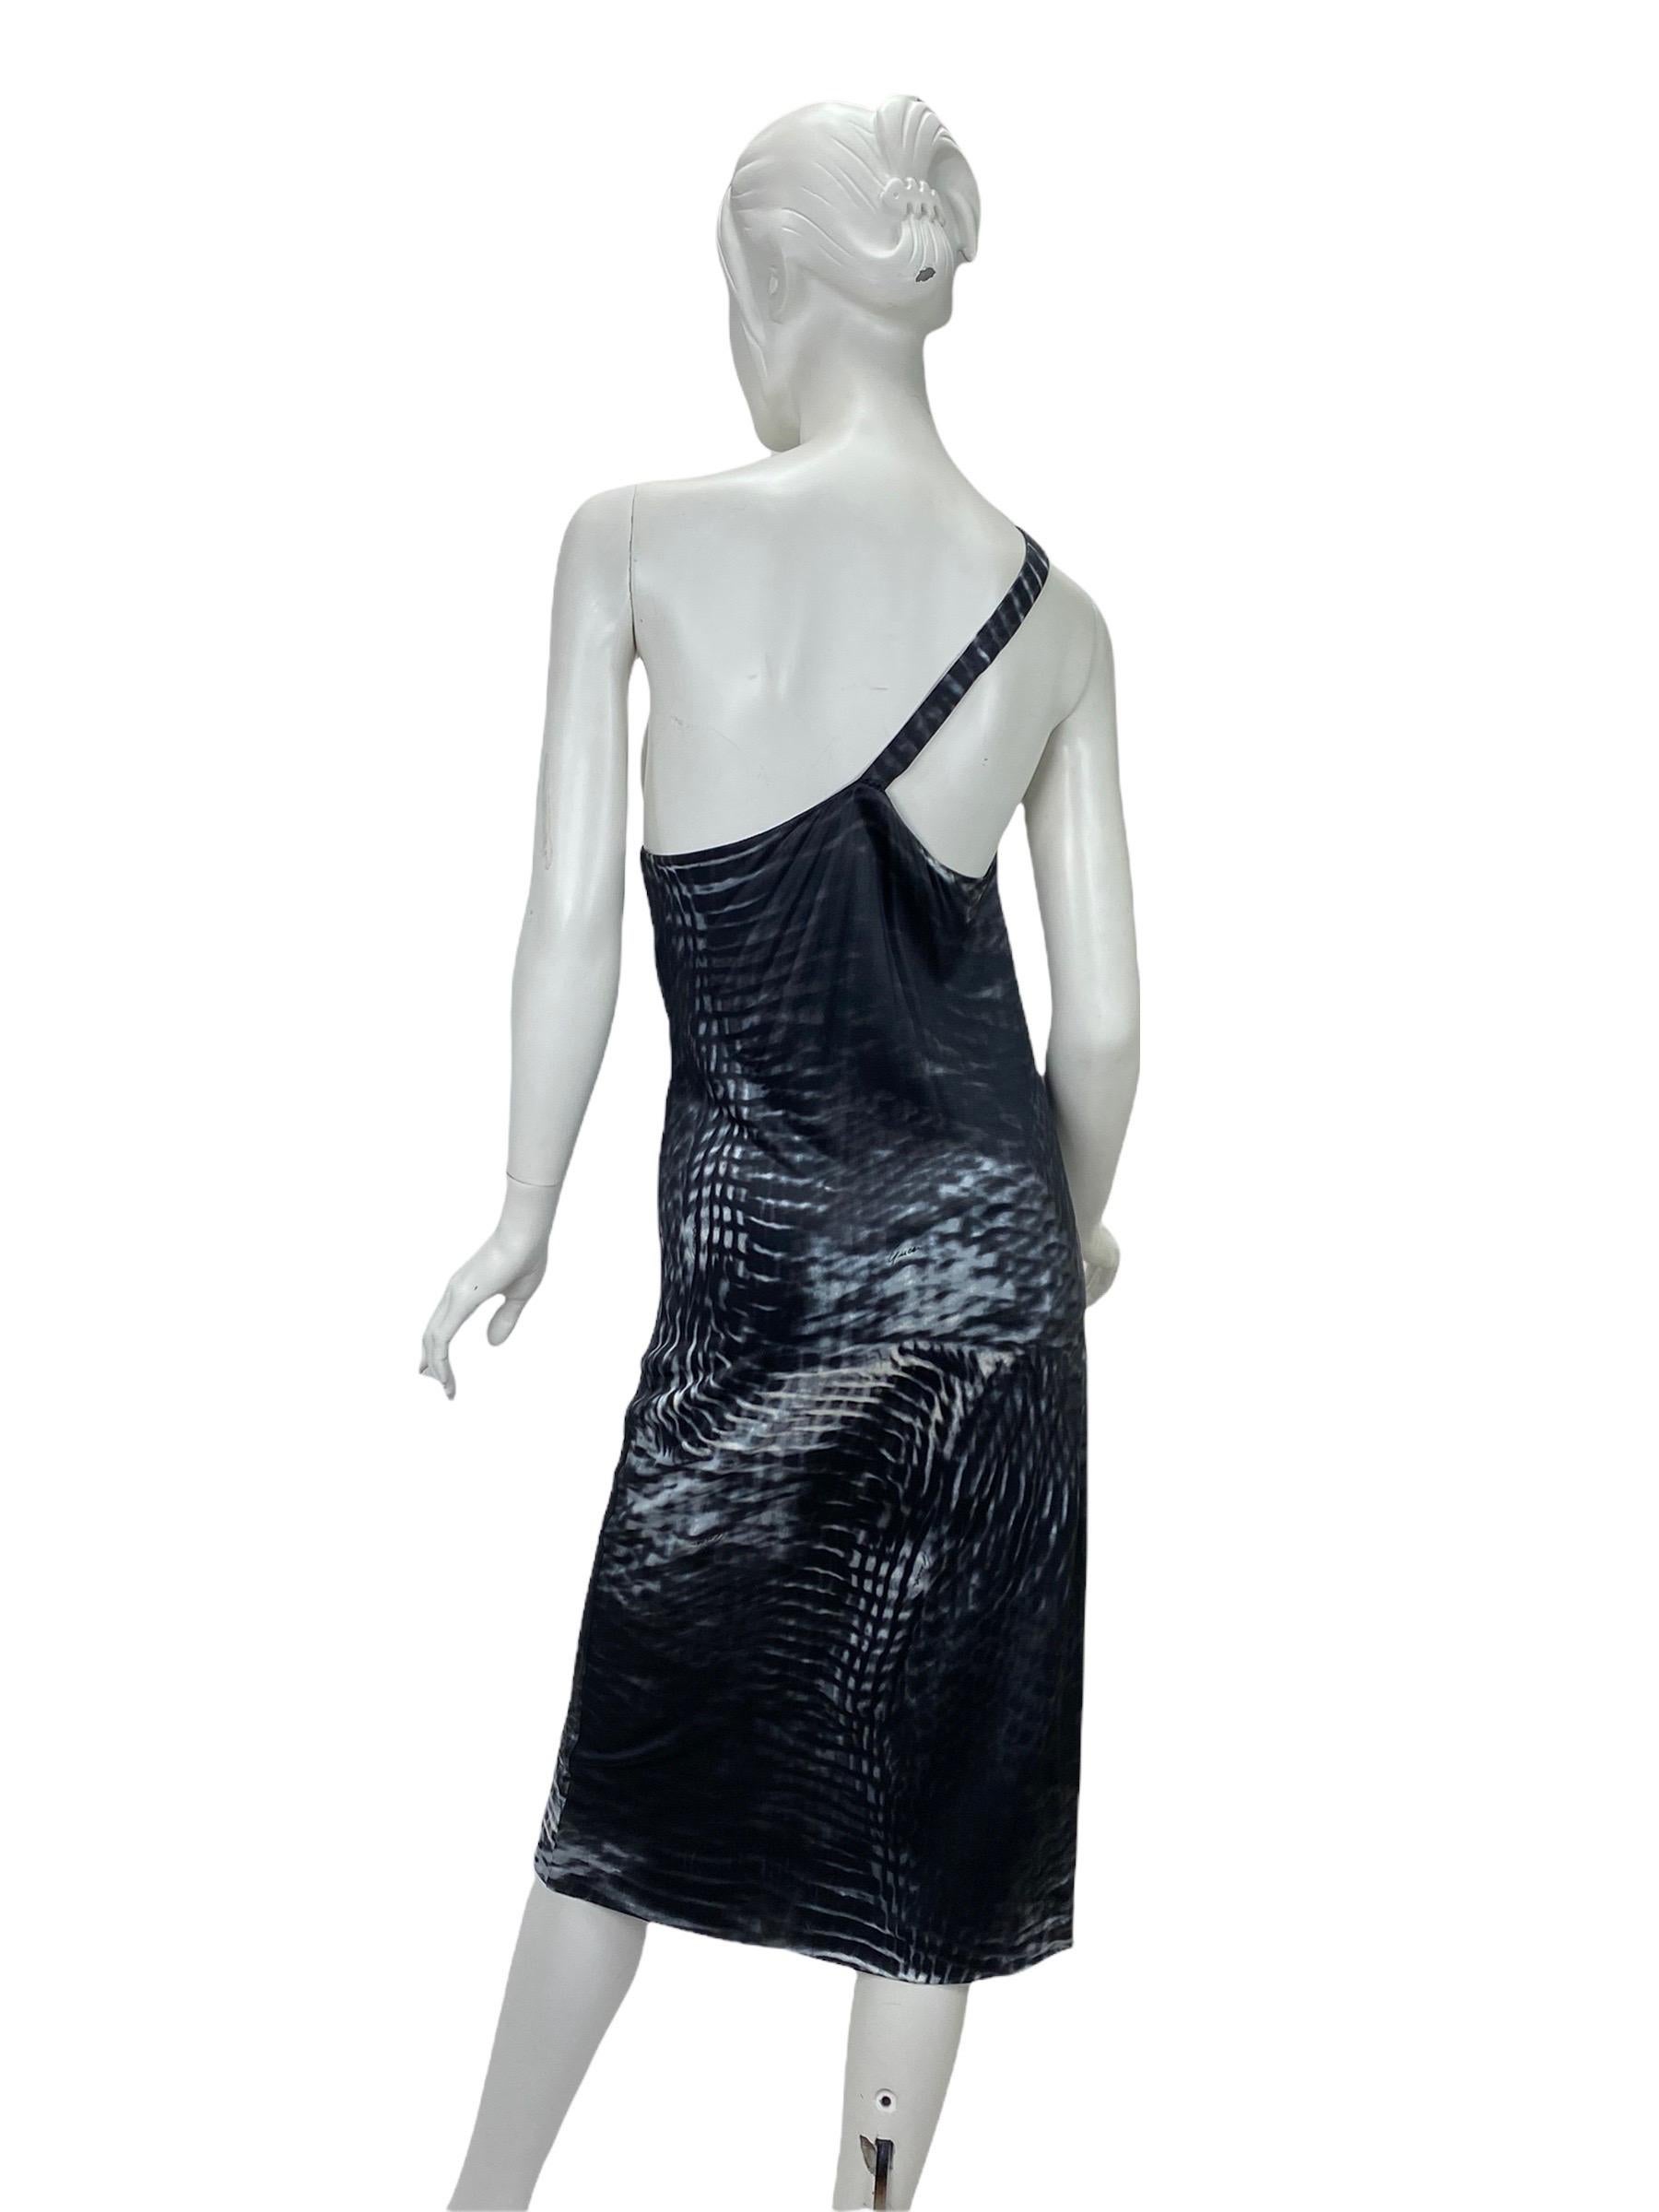 S/S 2000 Vintage Tom Ford for Gucci One Shoulder Dress Size 40 In Excellent Condition For Sale In Montgomery, TX